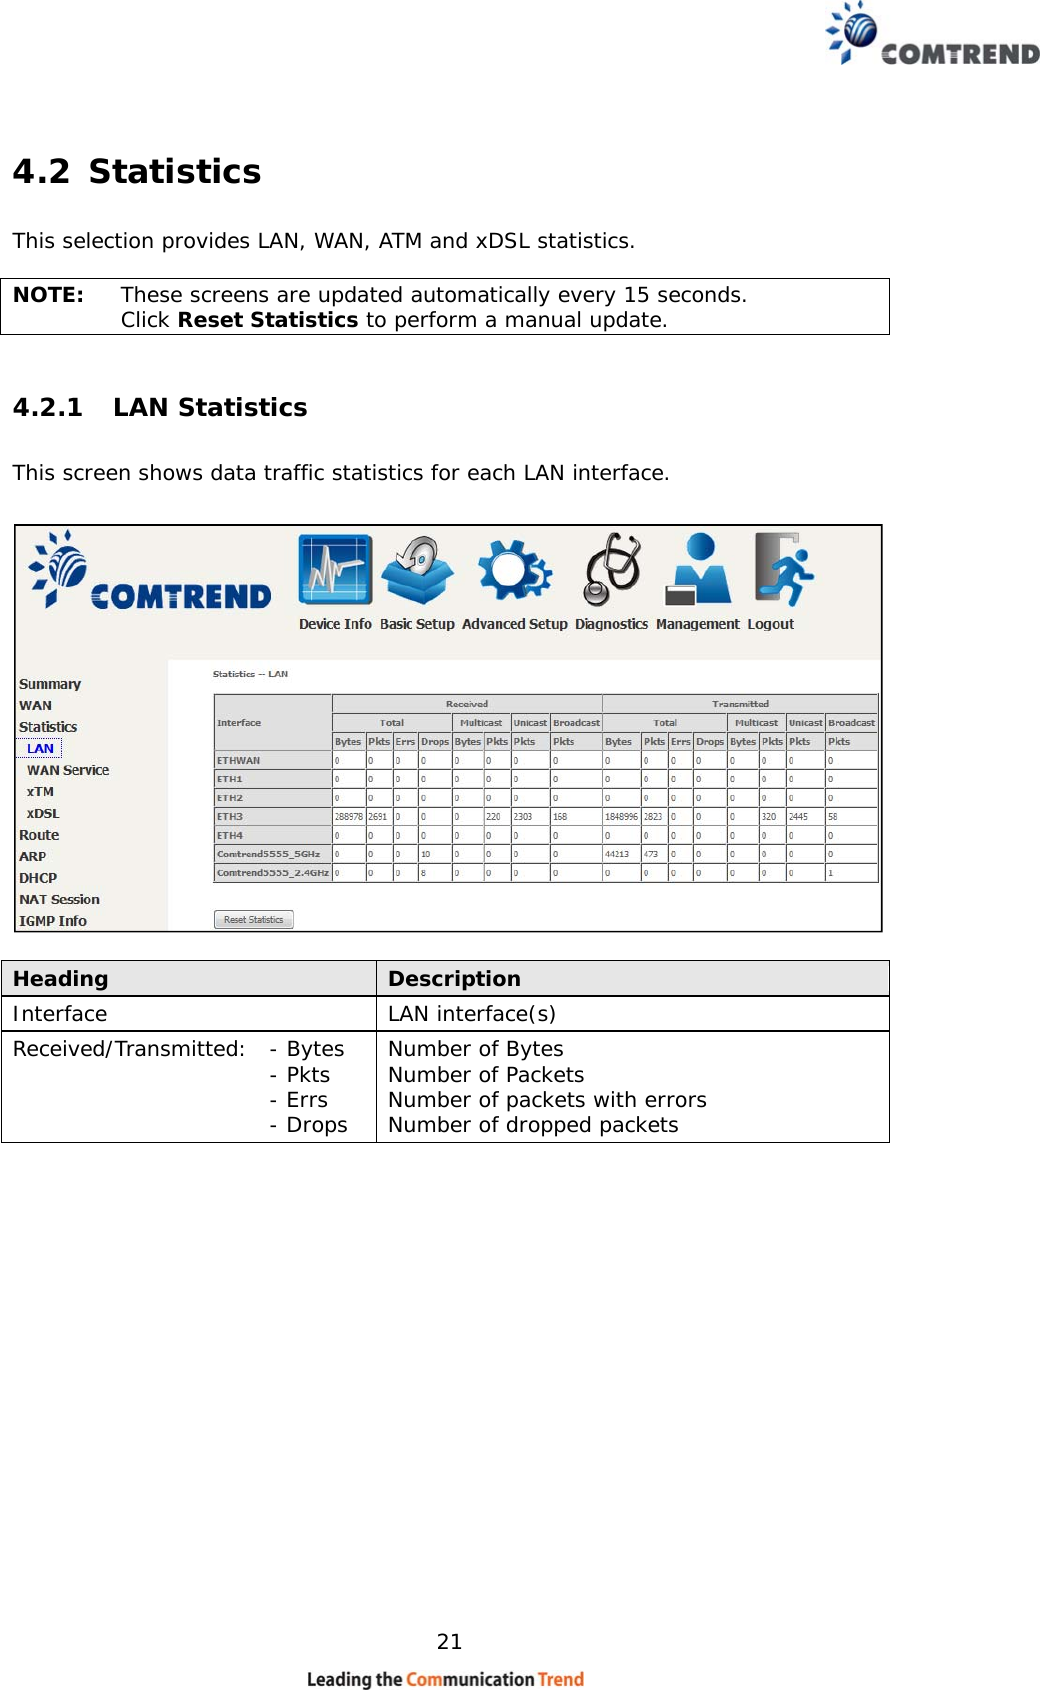    21 4.2 Statistics This selection provides LAN, WAN, ATM and xDSL statistics.  NOTE:  These screens are updated automatically every 15 seconds.  Click Reset Statistics to perform a manual update. 4.2.1 LAN Statistics This screen shows data traffic statistics for each LAN interface.    Heading  Description Interface  LAN interface(s) Received/Transmitted: - Bytes  - Pkts  - Errs  - Drops Number of Bytes  Number of Packets  Number of packets with errors Number of dropped packets     